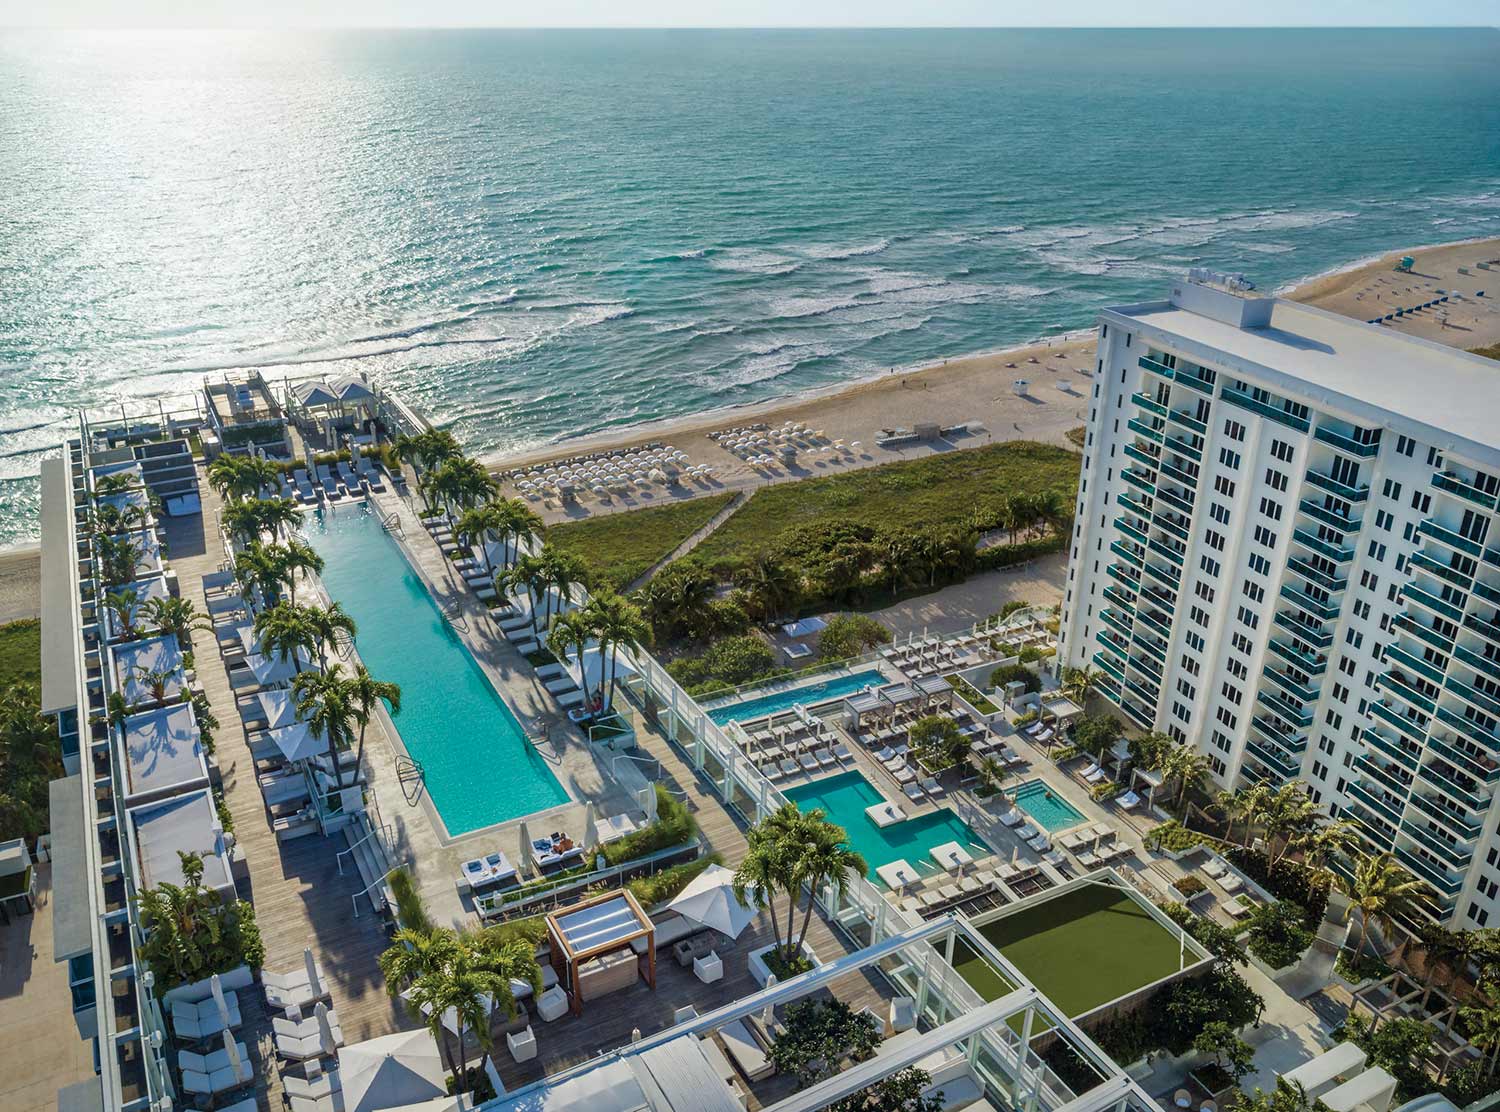 Hotel South Beach is a paradise of excess with something for everyone